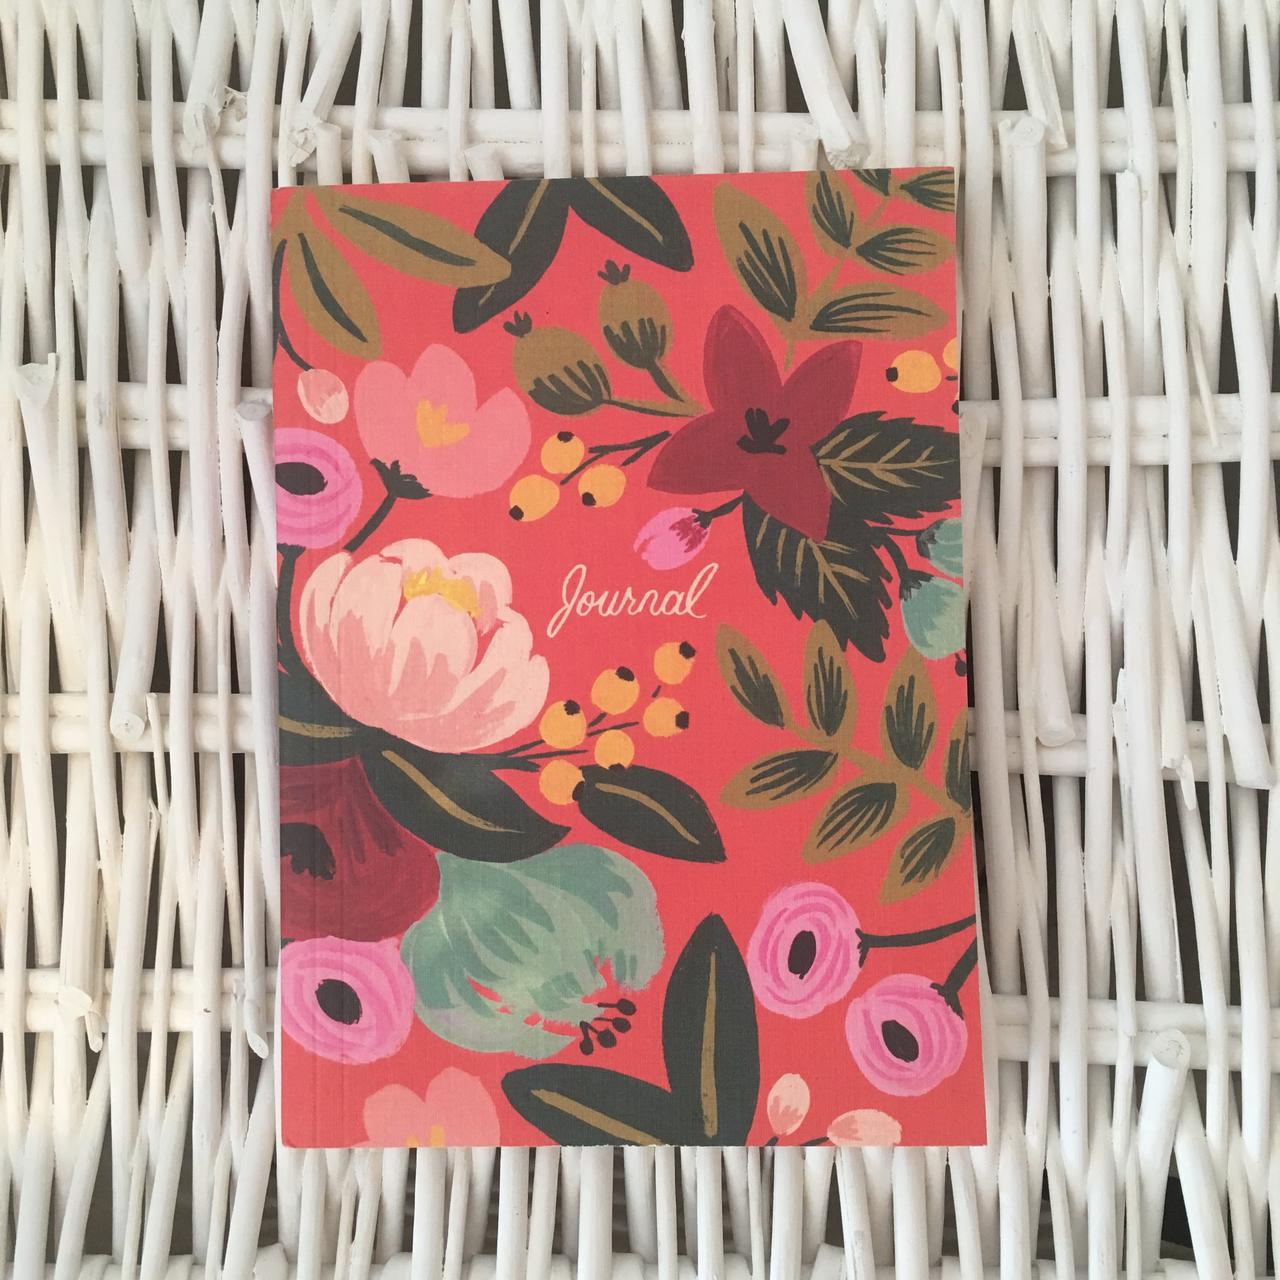 rifle-paper-co-notebook-pretty-floral-journal-depop